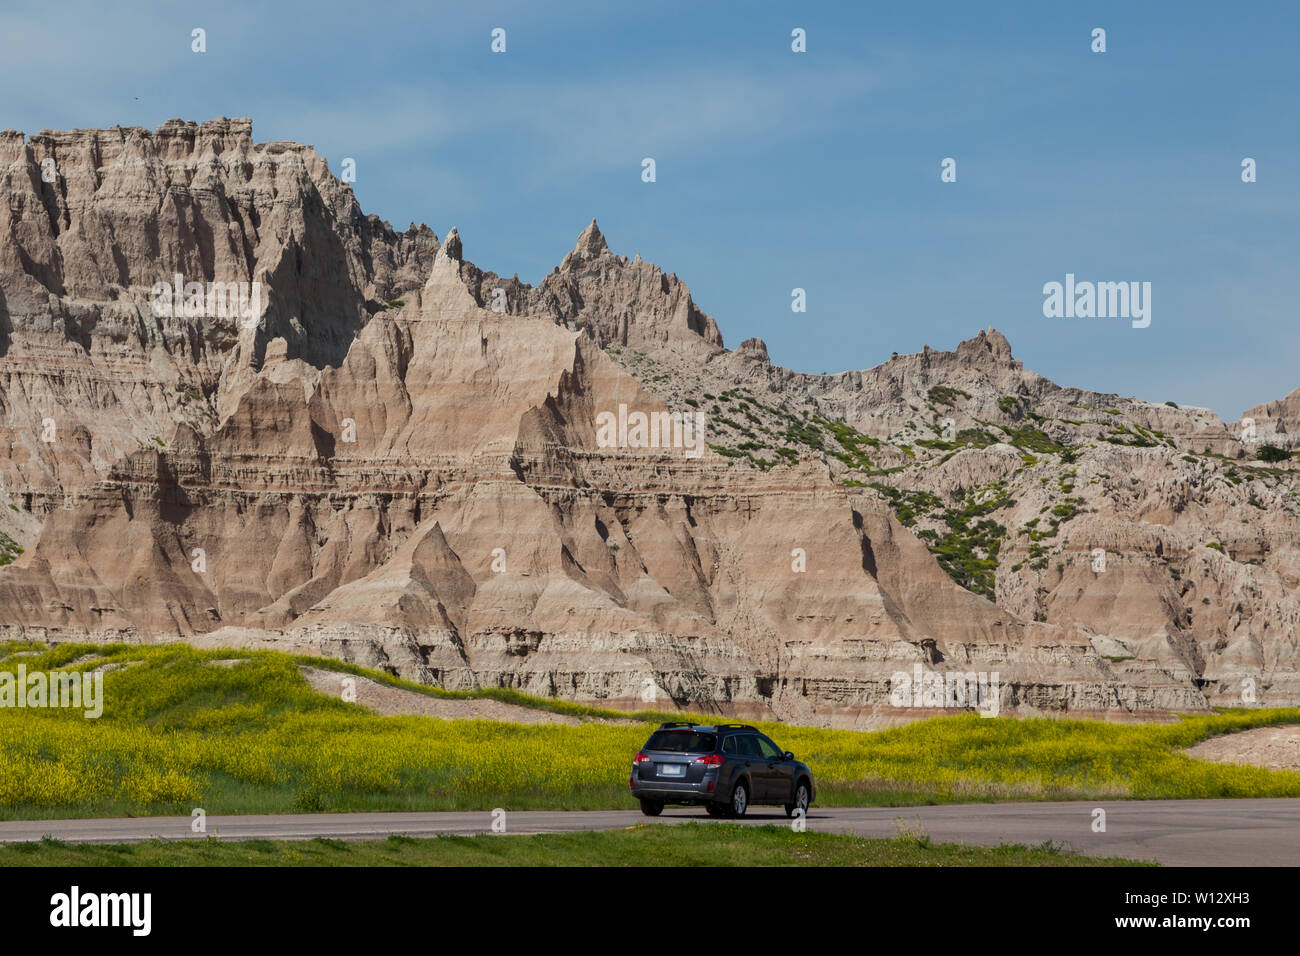 A vehicle drives next to the dynamically eroded mountain peaks of Badlands National Park with a super bloom of wildflowers at the base. Stock Photo